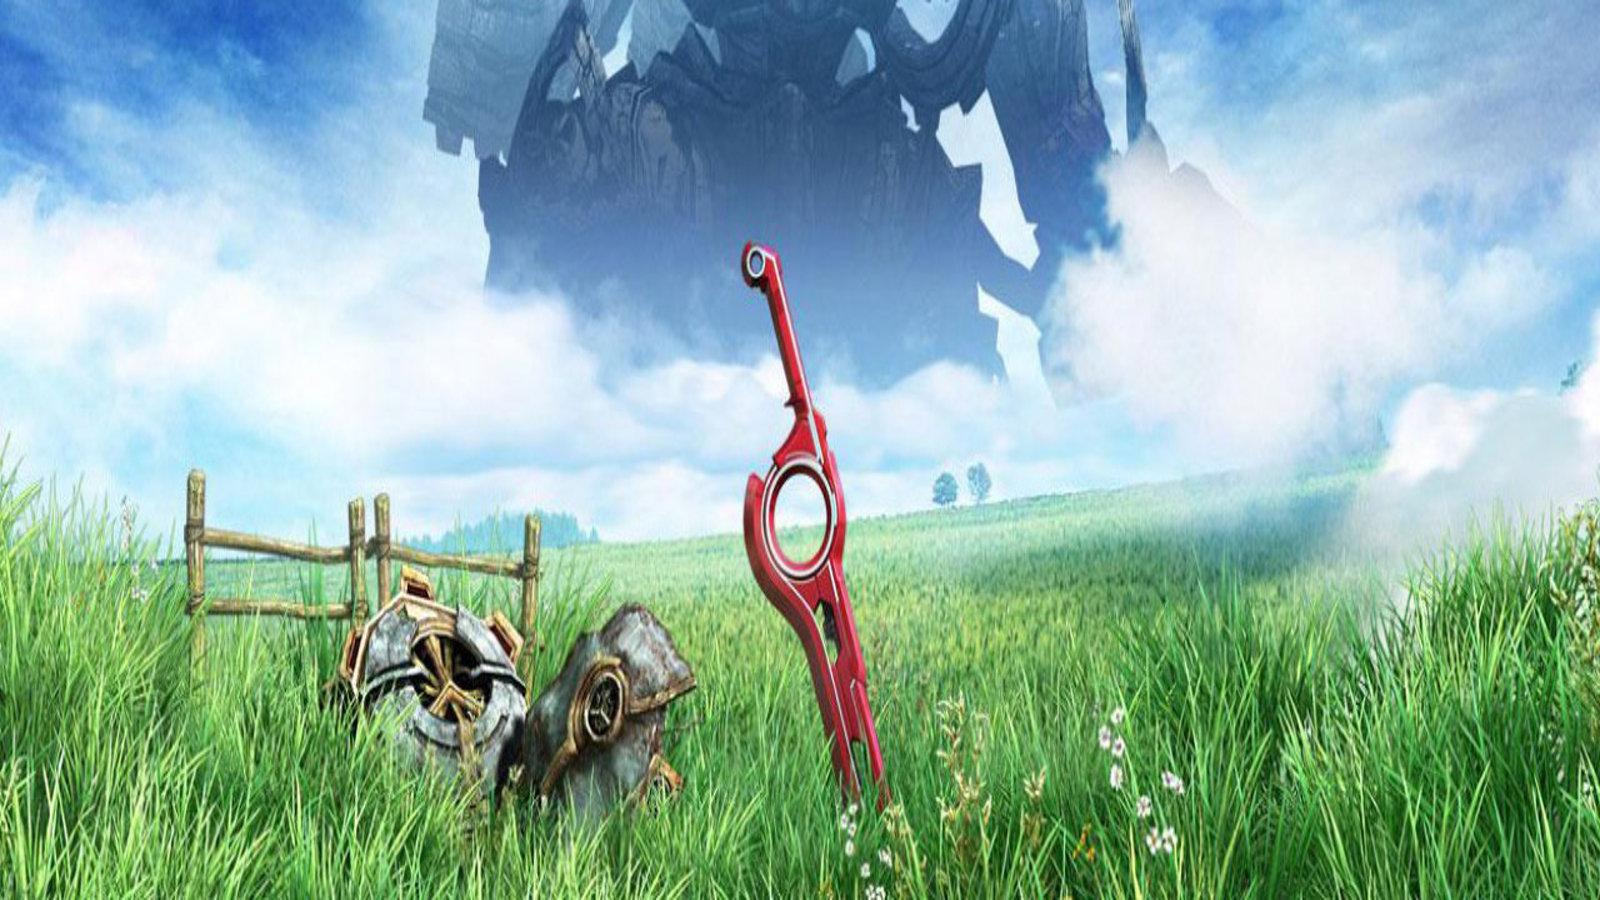 Review: Xenoblade Chronicles 3D (Nintendo 3DS) – Digitally Downloaded